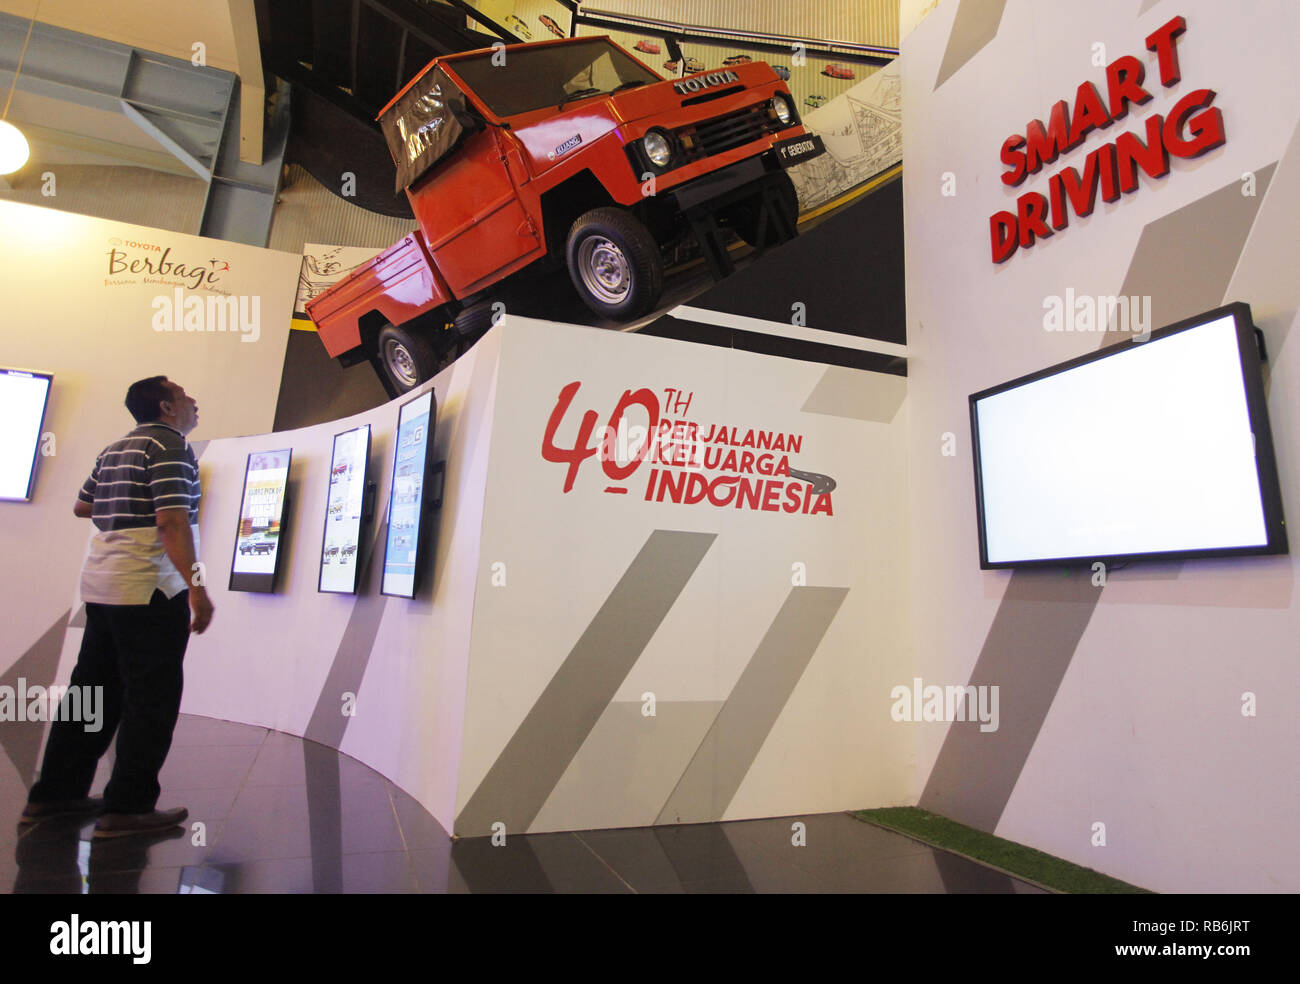 Malang, East Java, Indonesia. 5th Jan, 2019. A man seen watching the 1st Generation Toyota Kijang collection from the Museum Angkut (Museum of Transportation). This museum has thousands of collections of transportation vehicles from various eras. Credit: Adriana Adinandra/SOPA Images/ZUMA Wire/Alamy Live News Stock Photo